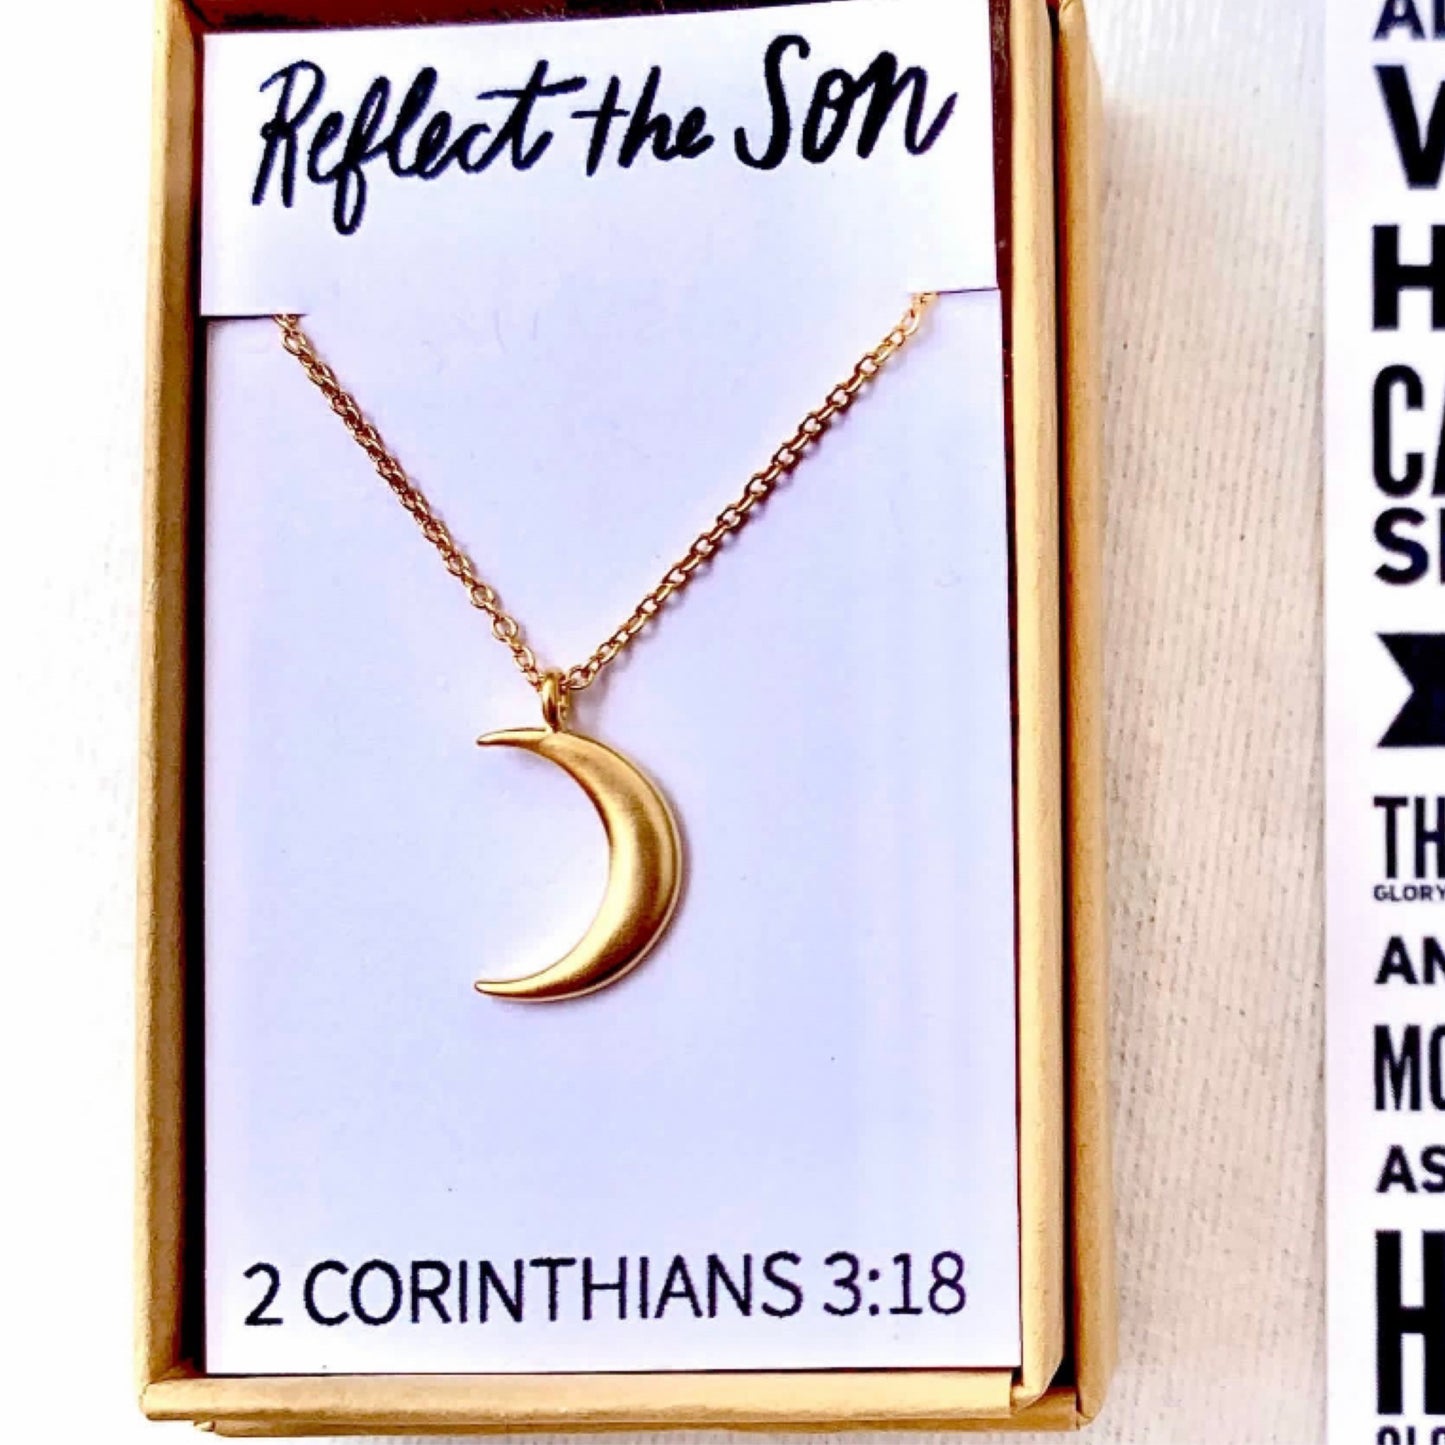 Reflect the Son necklace